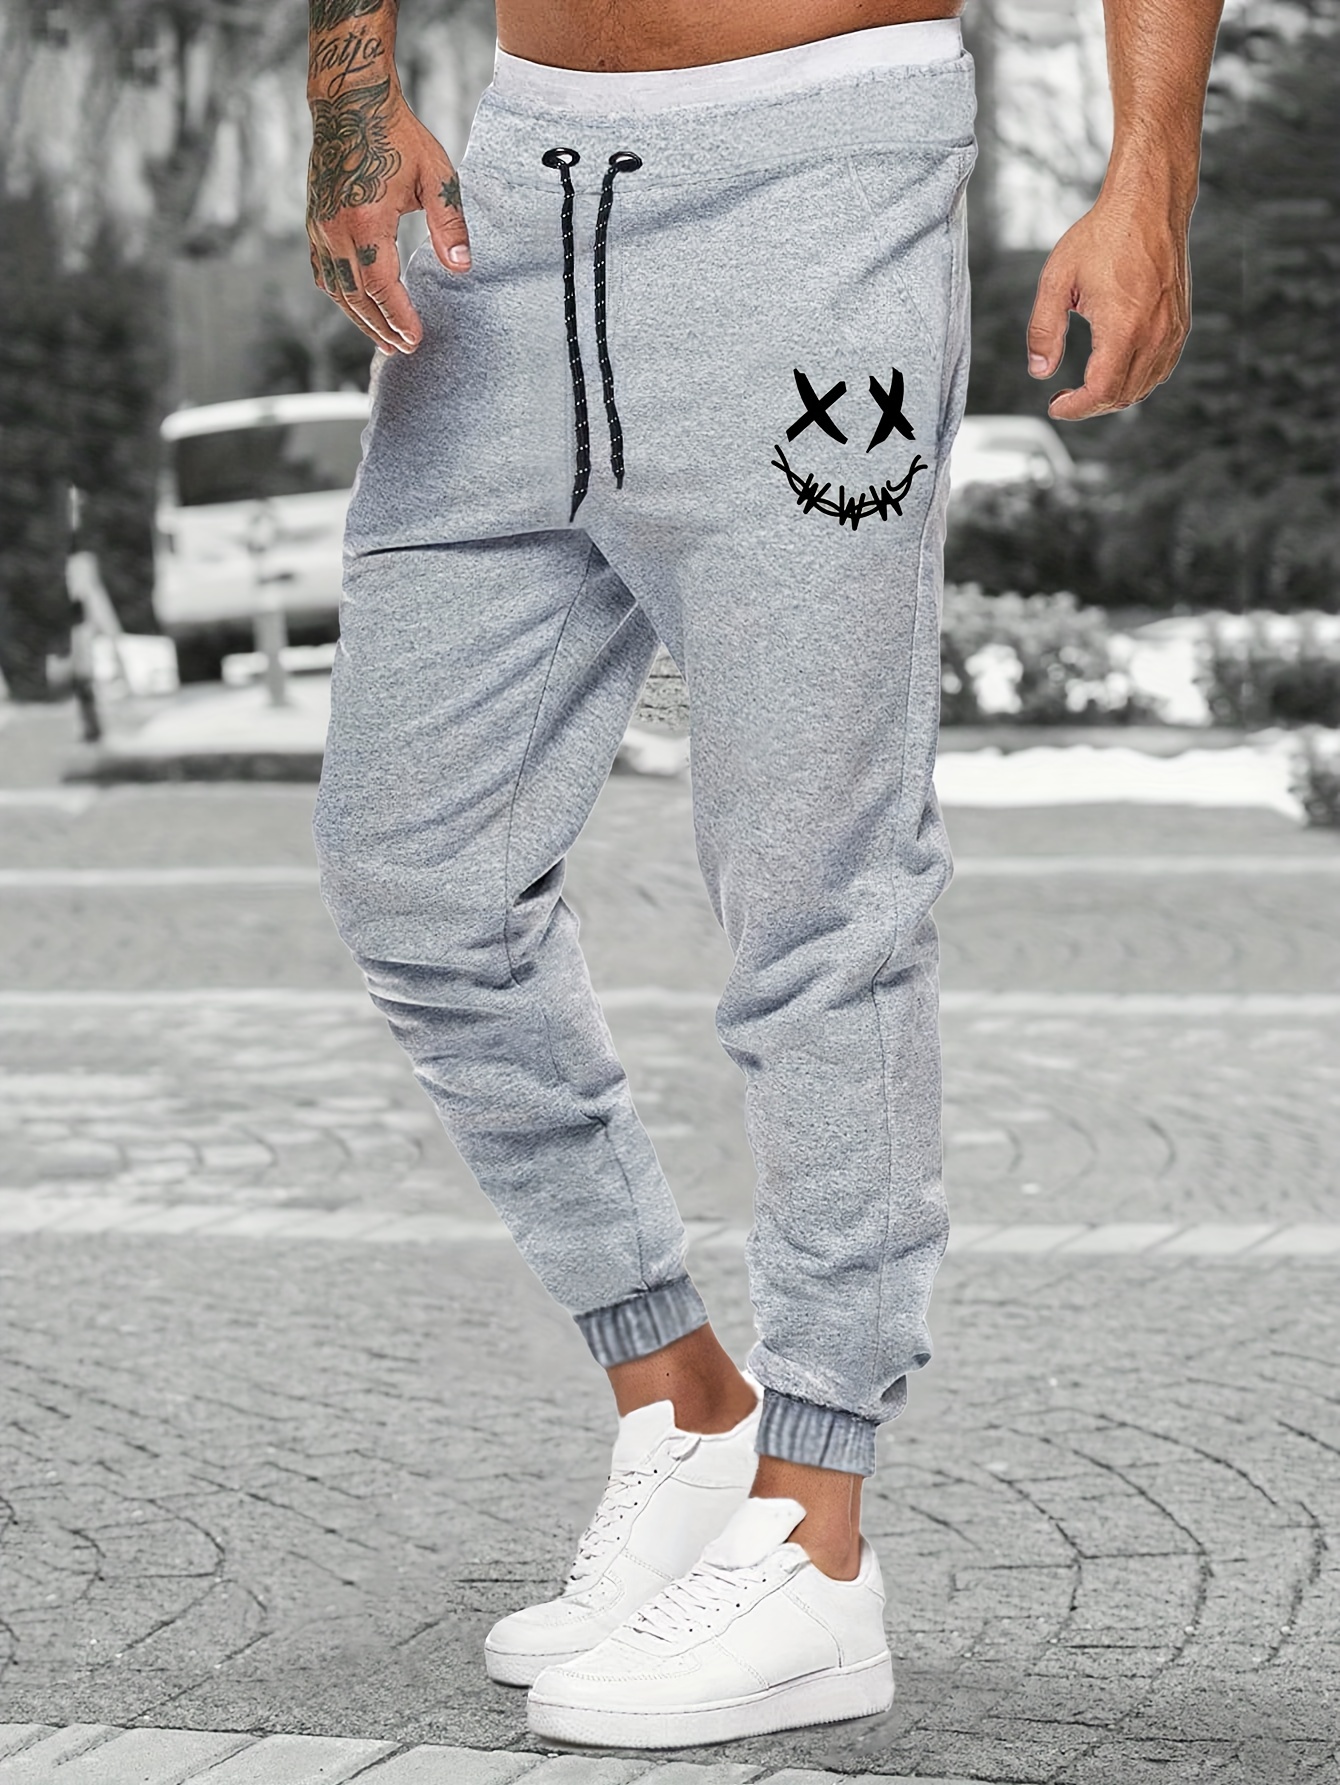 Men's Stretch Casual Sports Pants Gray